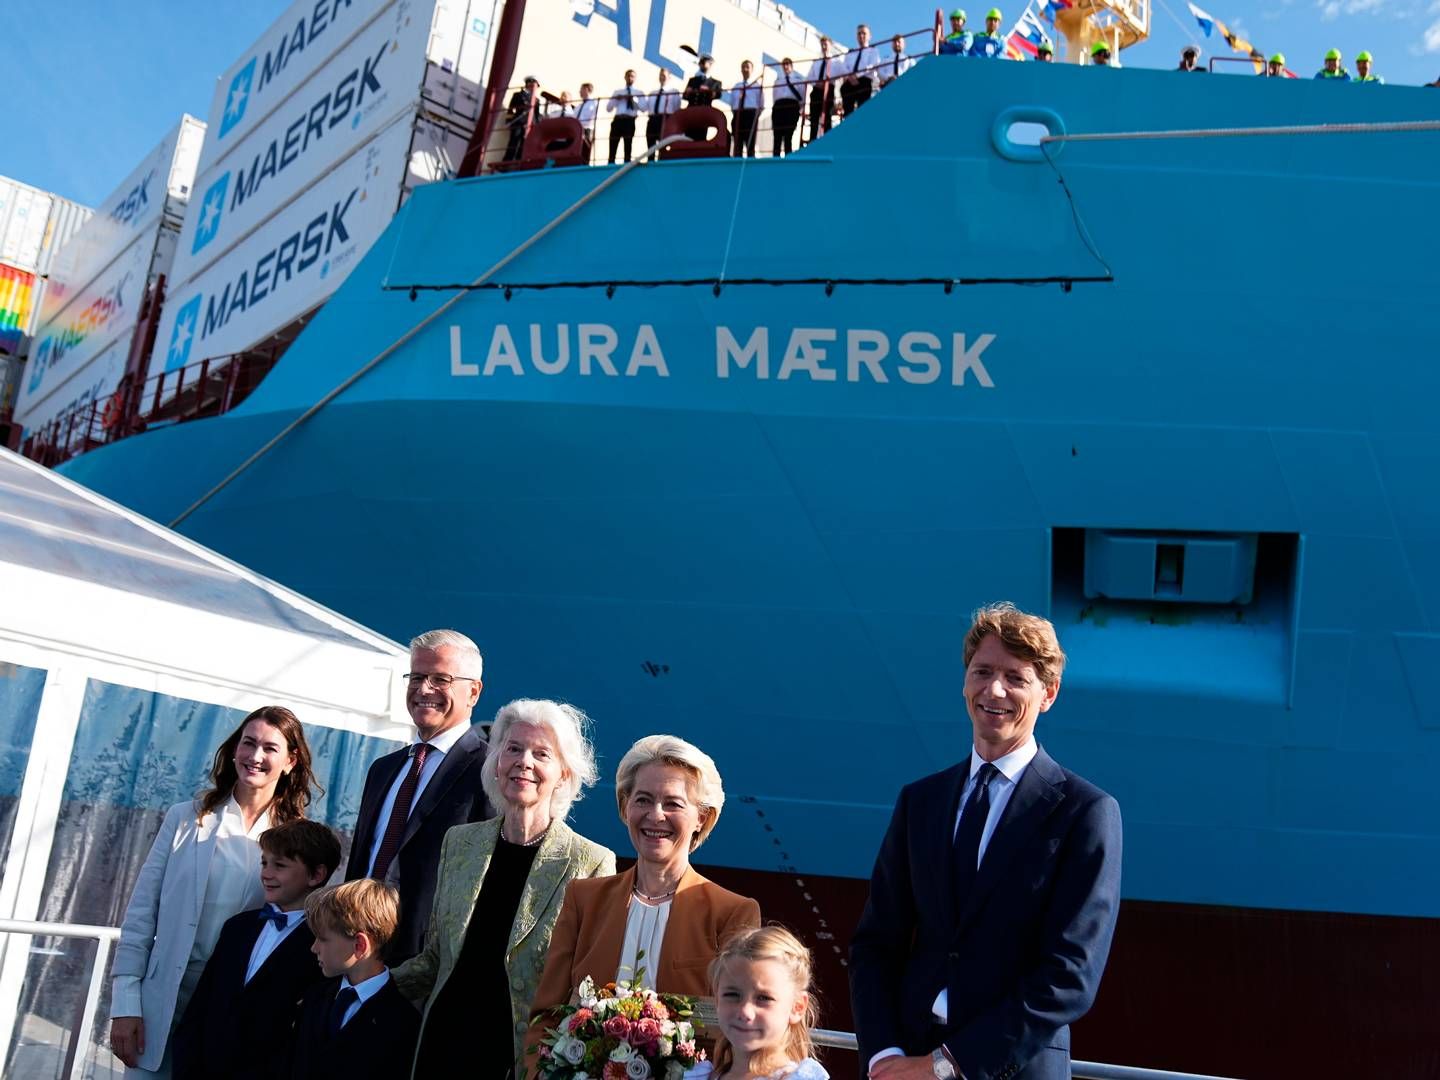 "Laura Maersk", the new container ship that will be the first in the world to run on methanol, was named on Thursday by EU Commission President Ursula von der Leyen. On the right in the photo is Robert Mærsk Uggla. | Foto: Mads Claus Rasmussen/Ritzau Scanpix